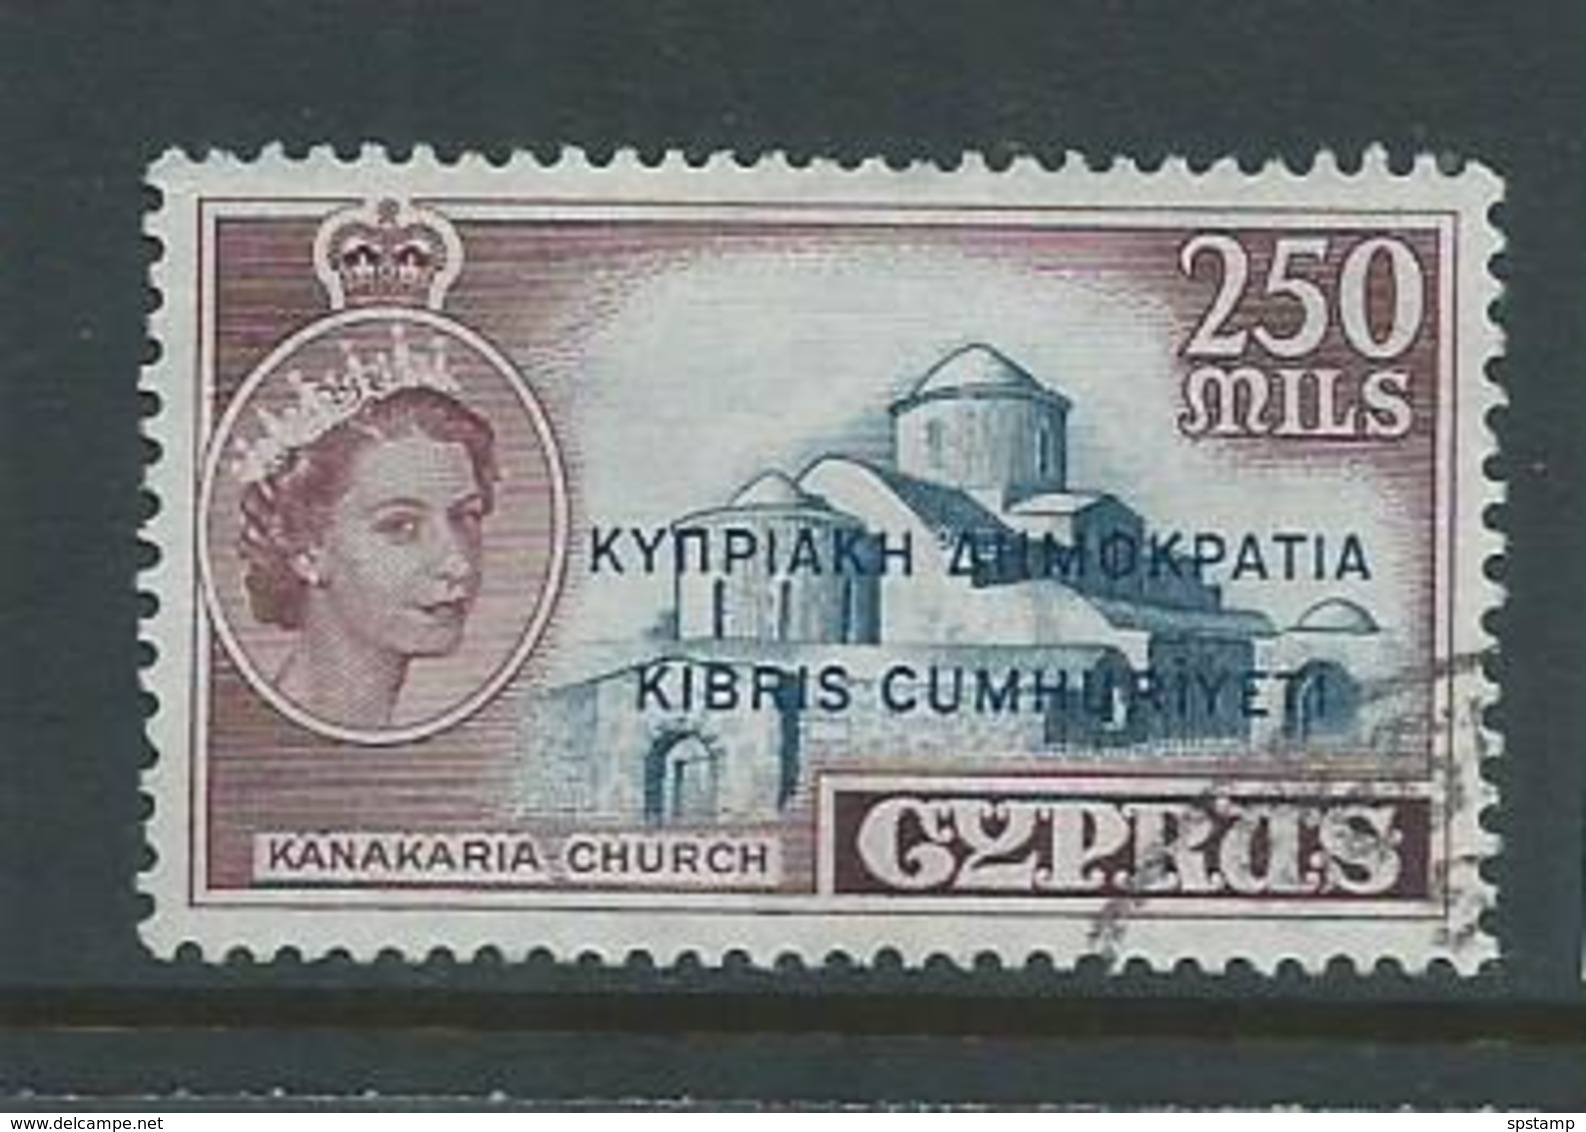 Cyprus 1960 Republic Overprint Definitives 250 Mils Kanakaria Church FU - Used Stamps